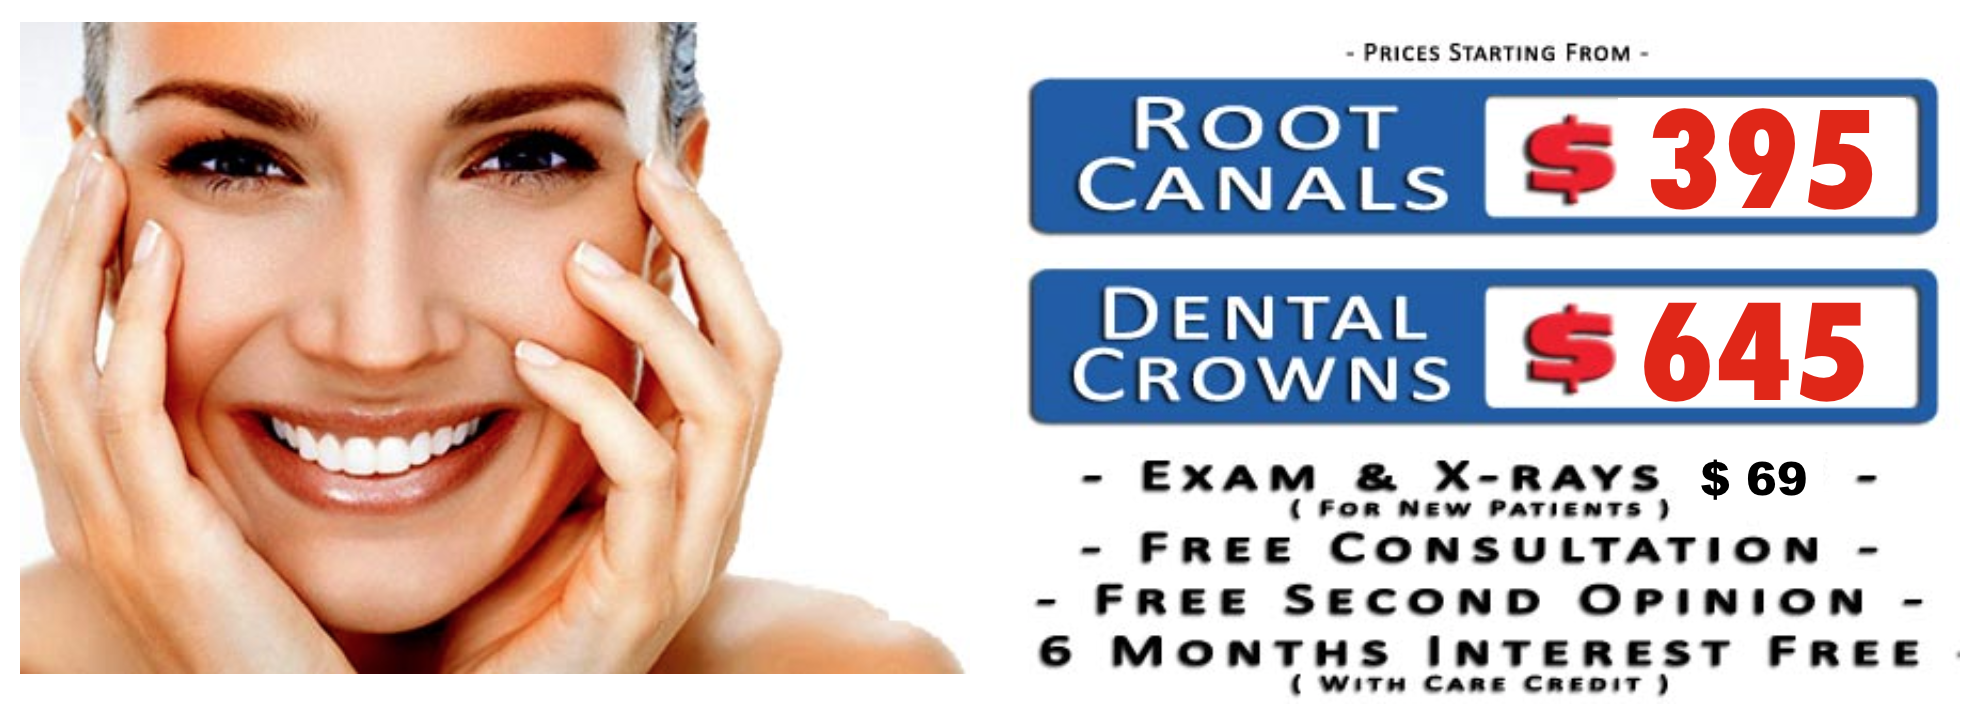 Save Up To 75% On Dental Crowns